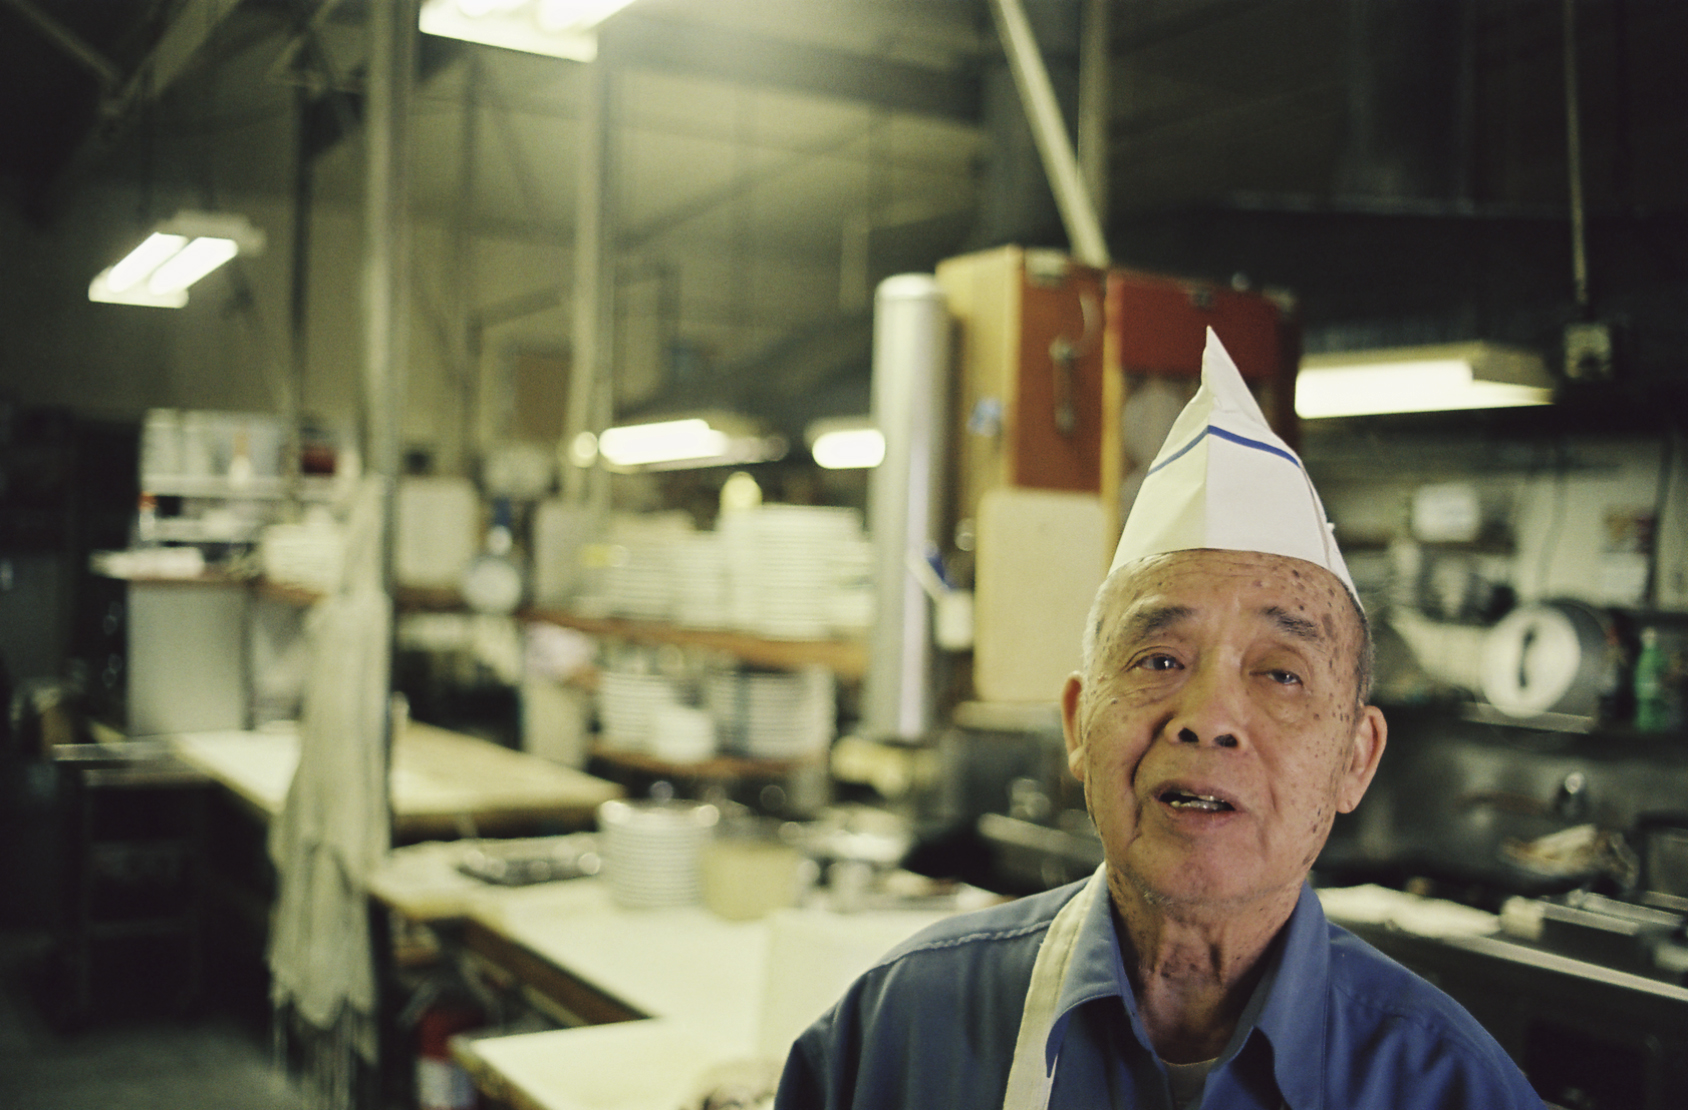 Color photograph of an East Asian man in a blue shirt, wearing a paper cap, with a soft-focus industrial kitchen behind him.